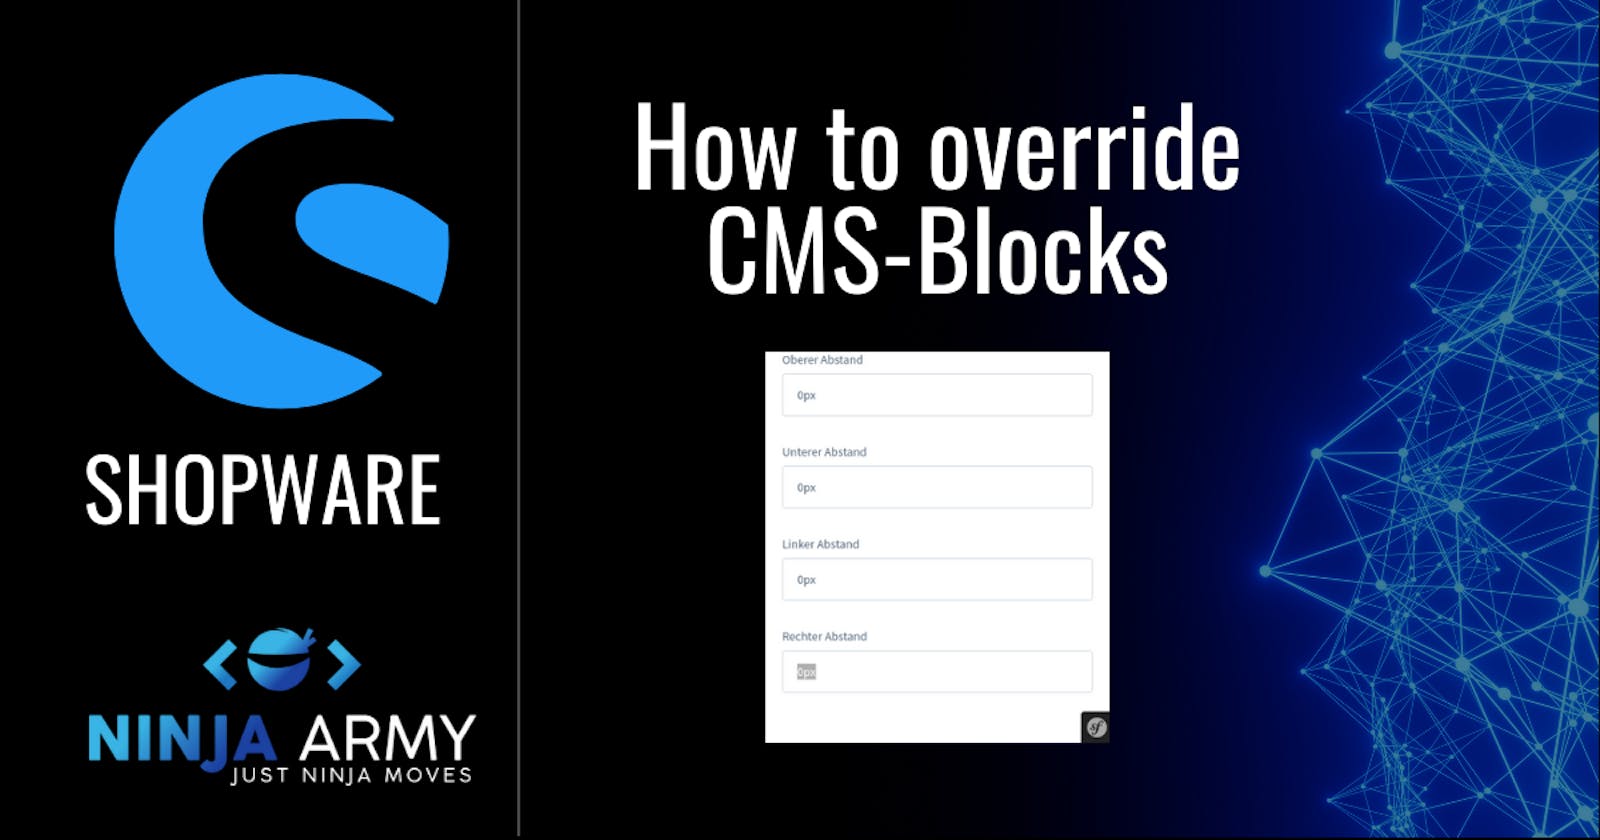 How to Override Shopware 6 CMS-Blocks defaultConfig: A Step-by-Step Guide